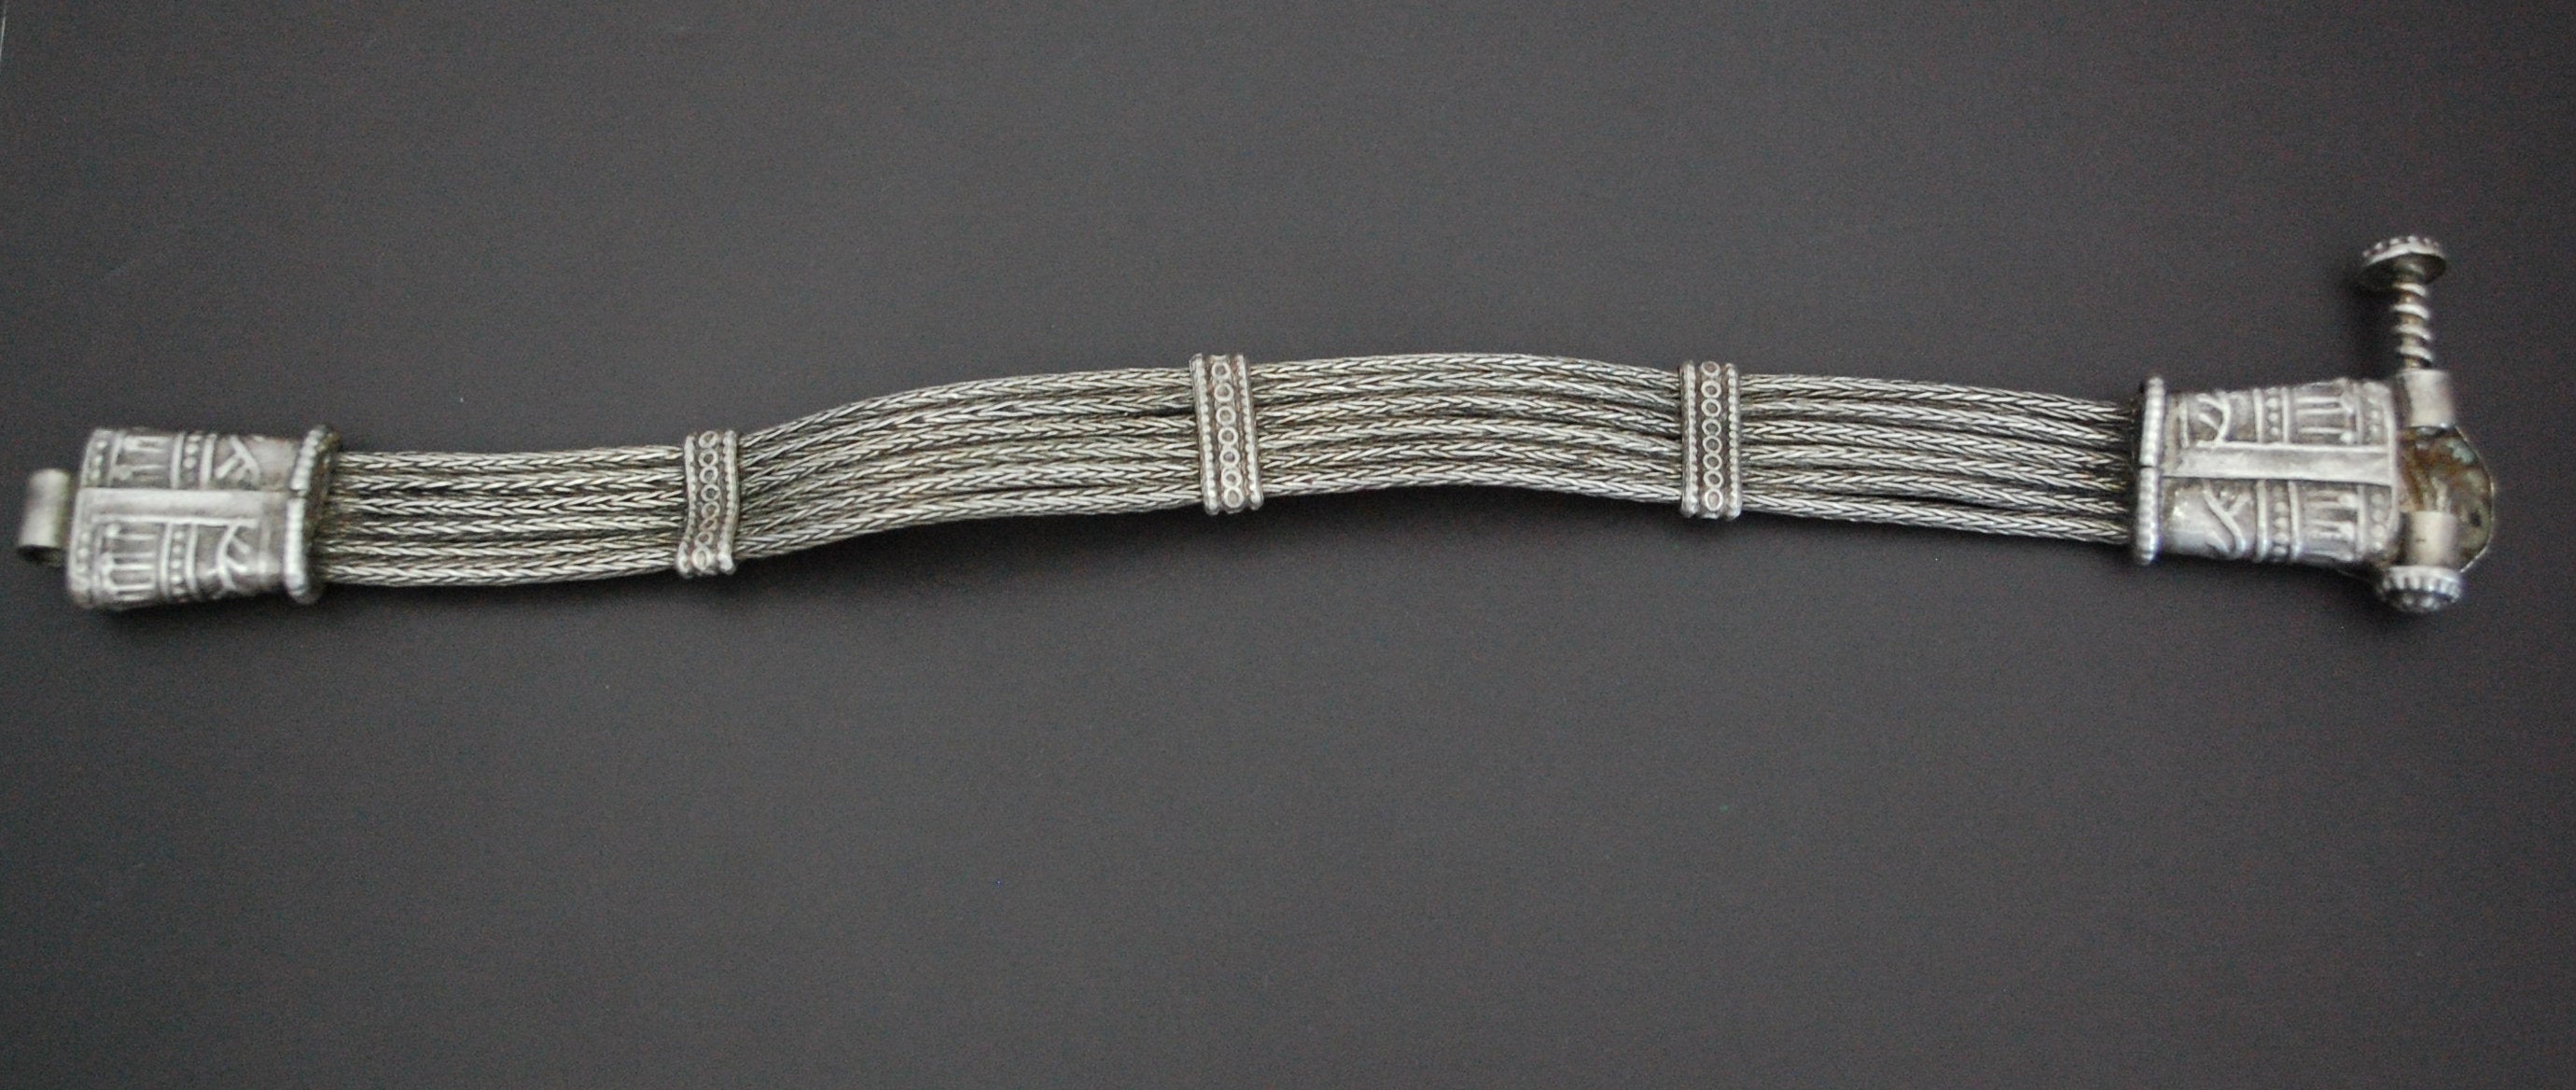 Rajasthani Silver Snake Chain Bracelet with Screw Closure